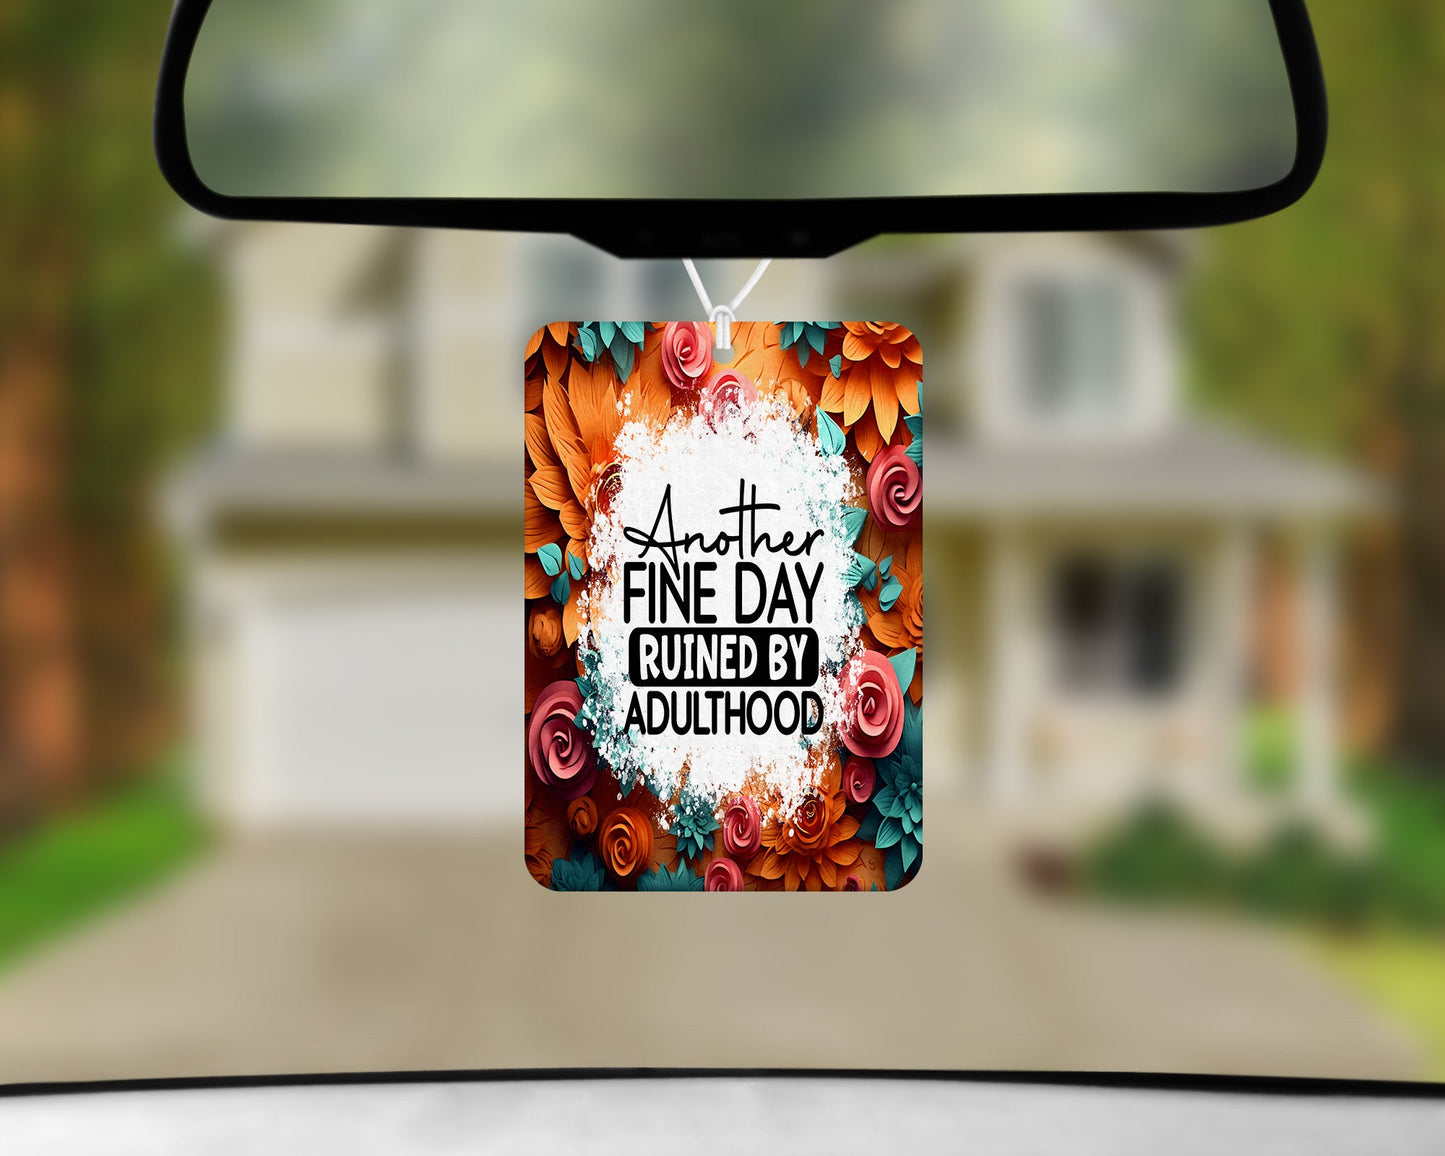 Another Fine Day Ruined By Adulthood|Freshie|Includes Scent Bottle - Vehicle Air Freshener